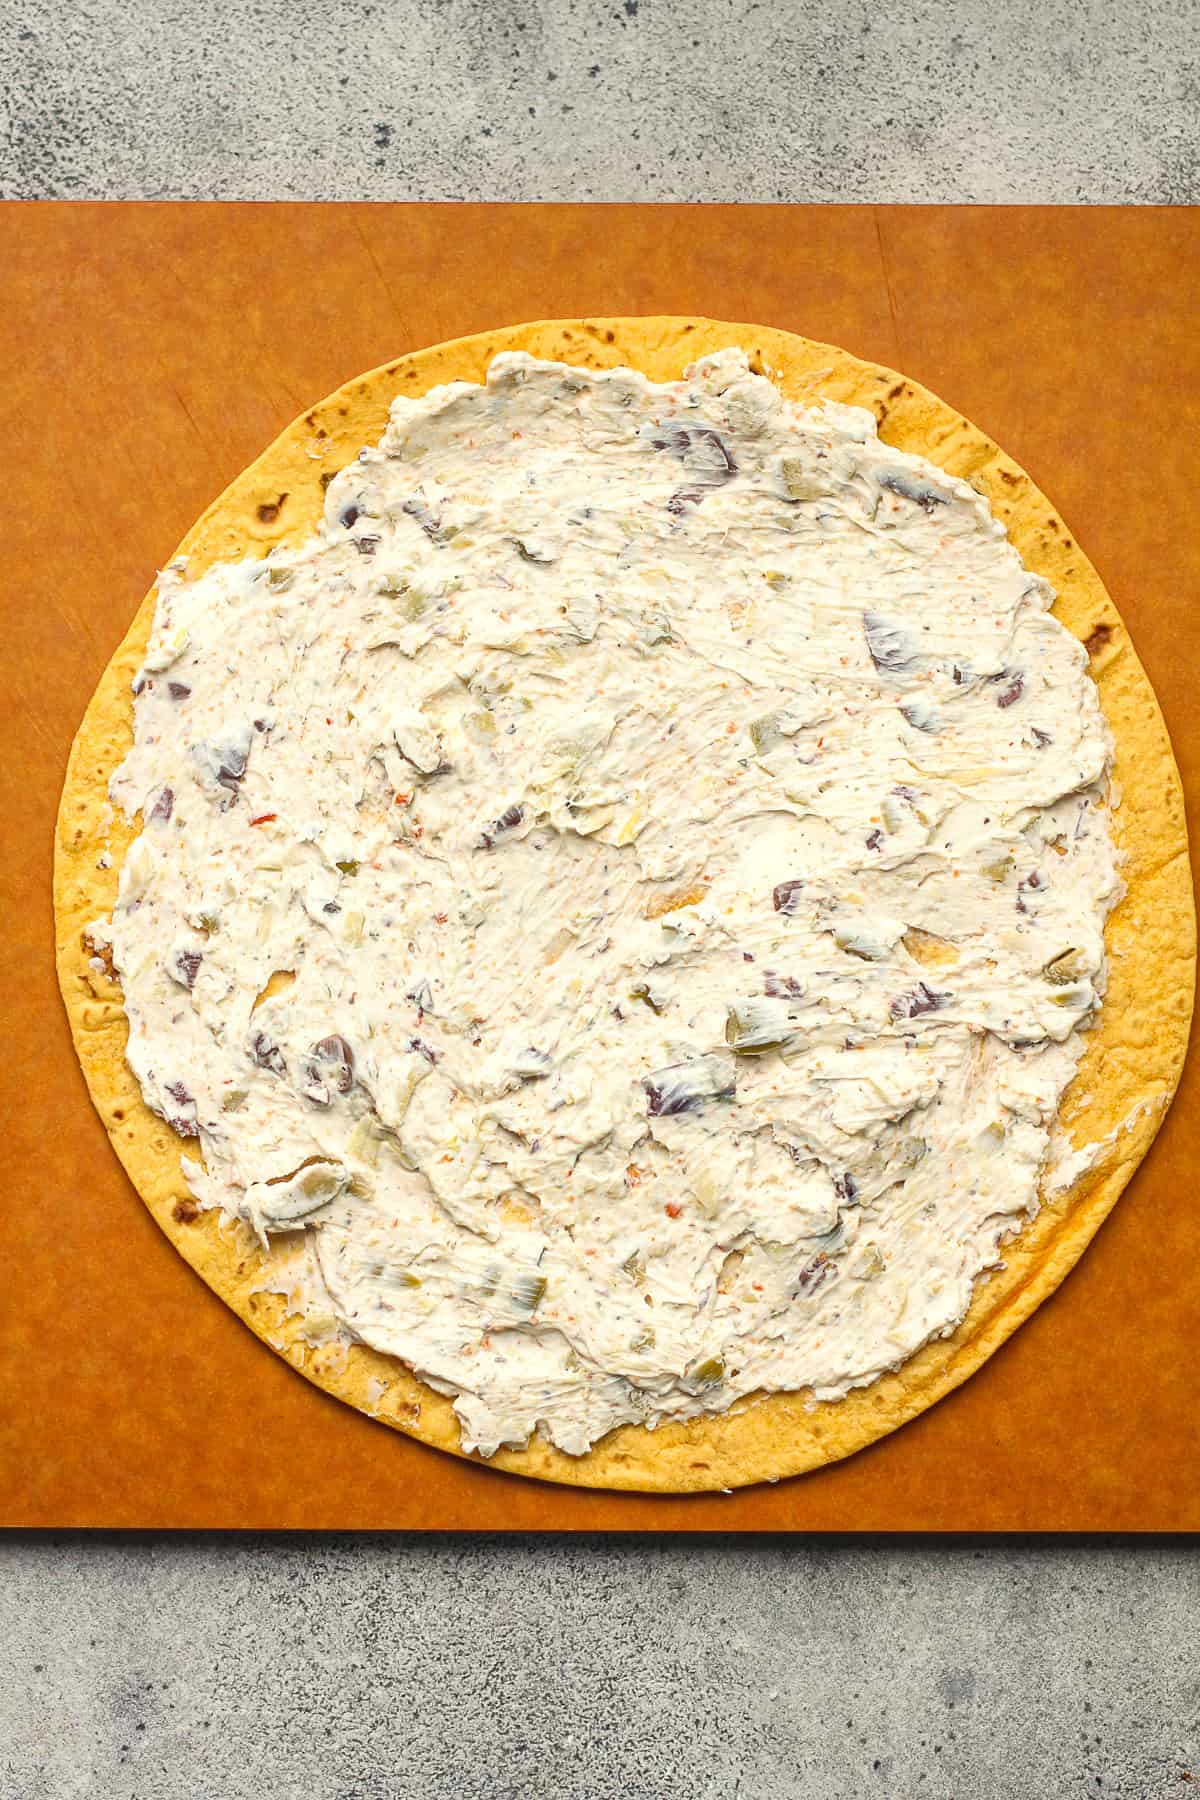 A tortilla with a smear of the cream cheese mixture.